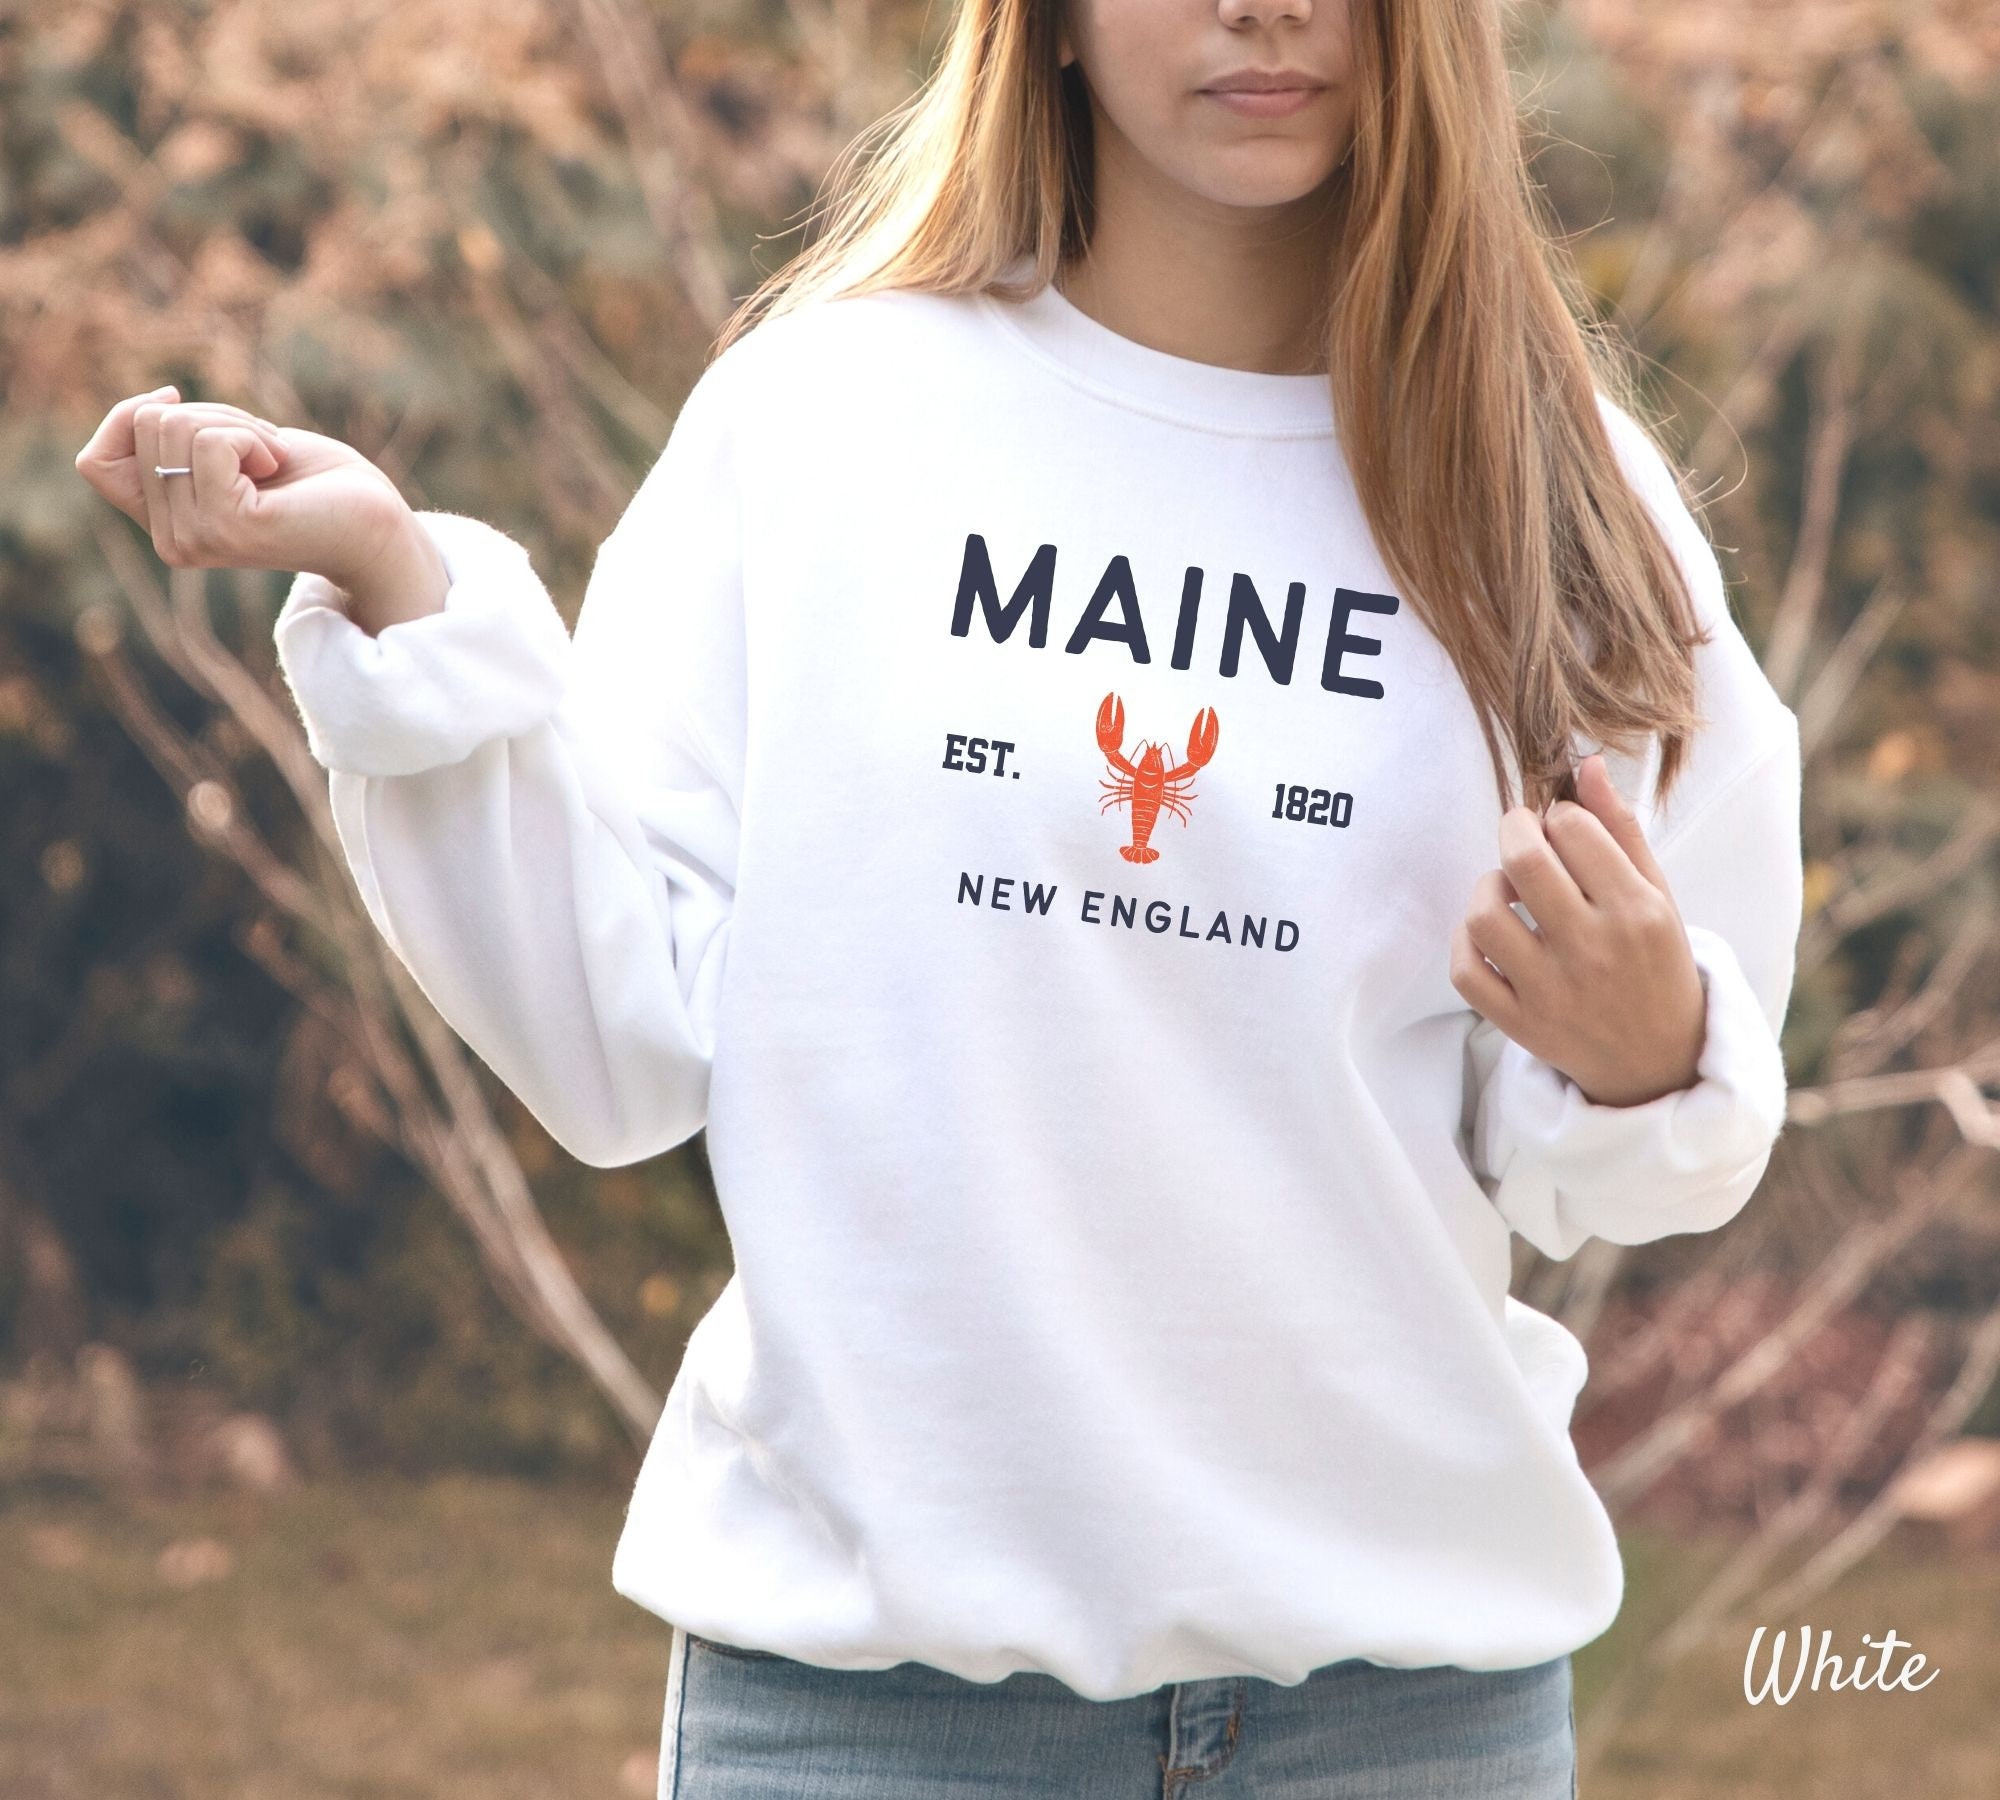 Discover Maine Sweatshirt, New England Lobster Soft and Comfortable Pullover